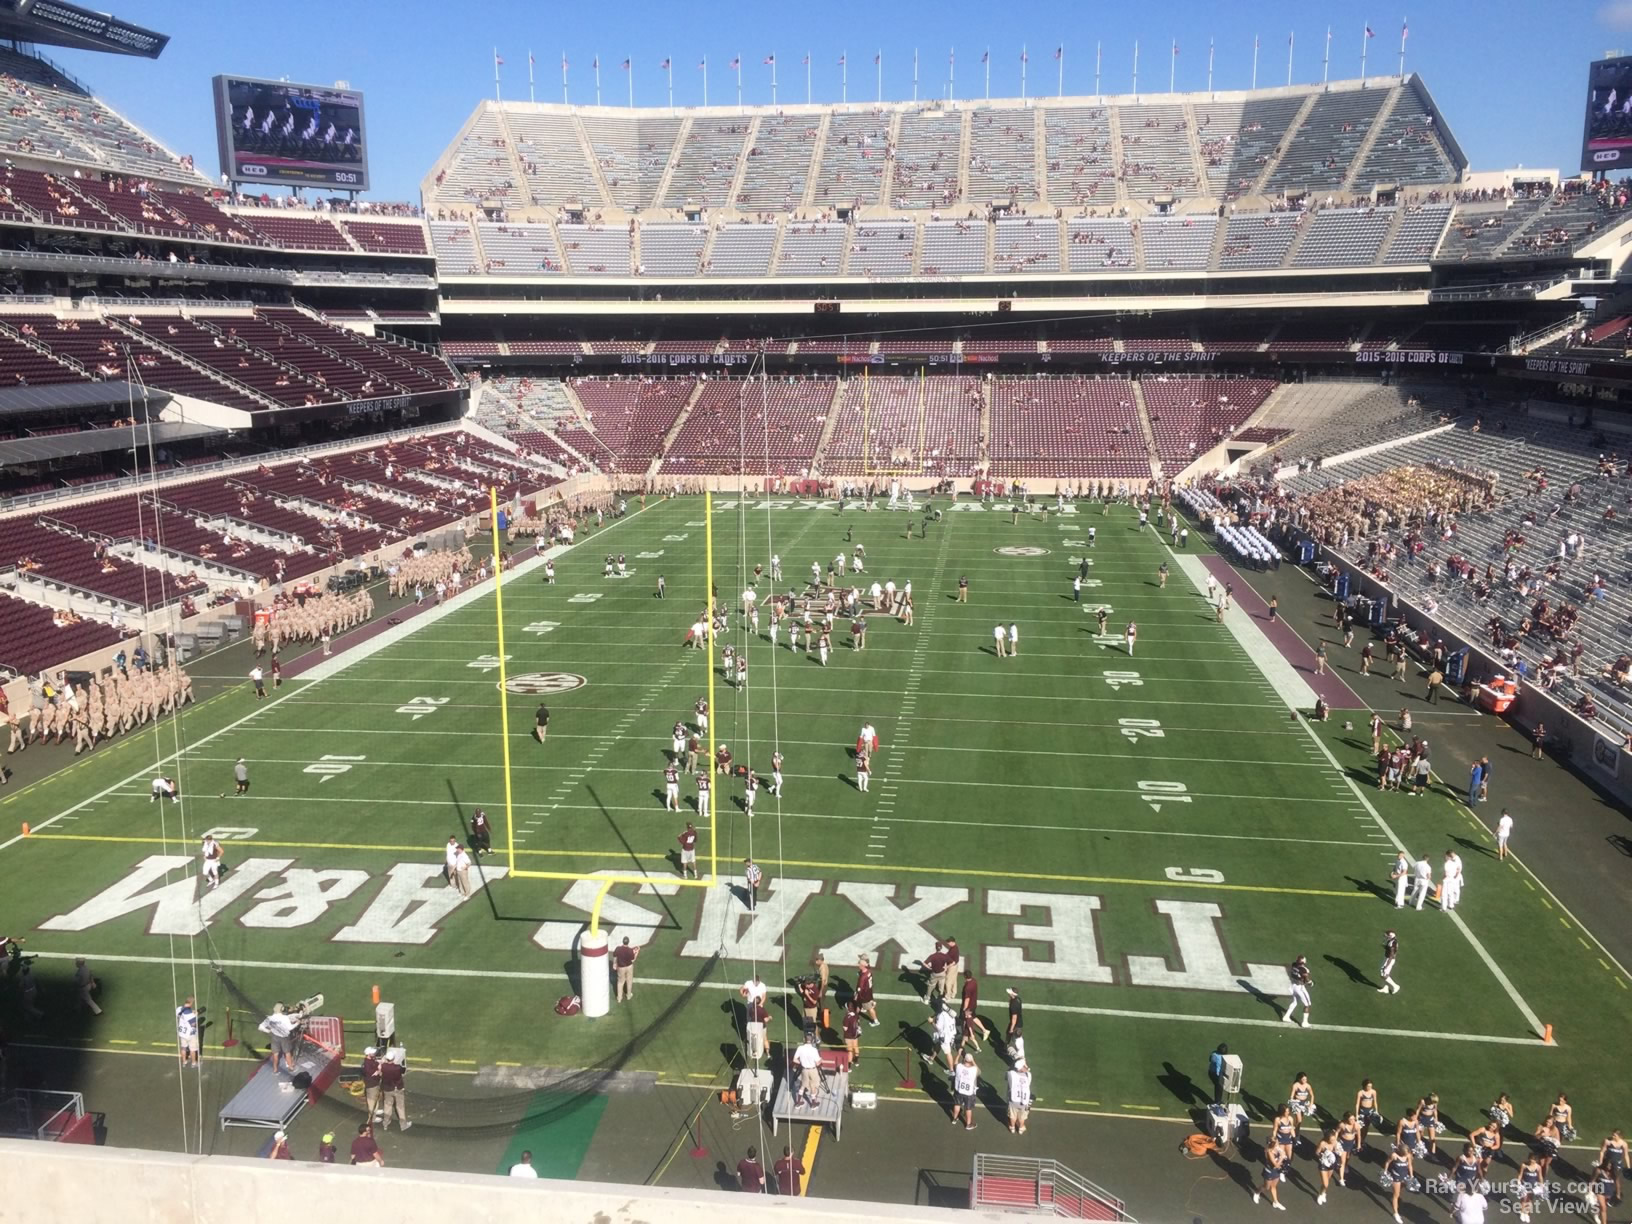 Kyle Field Seating Chart With Rows And Seat Numbers